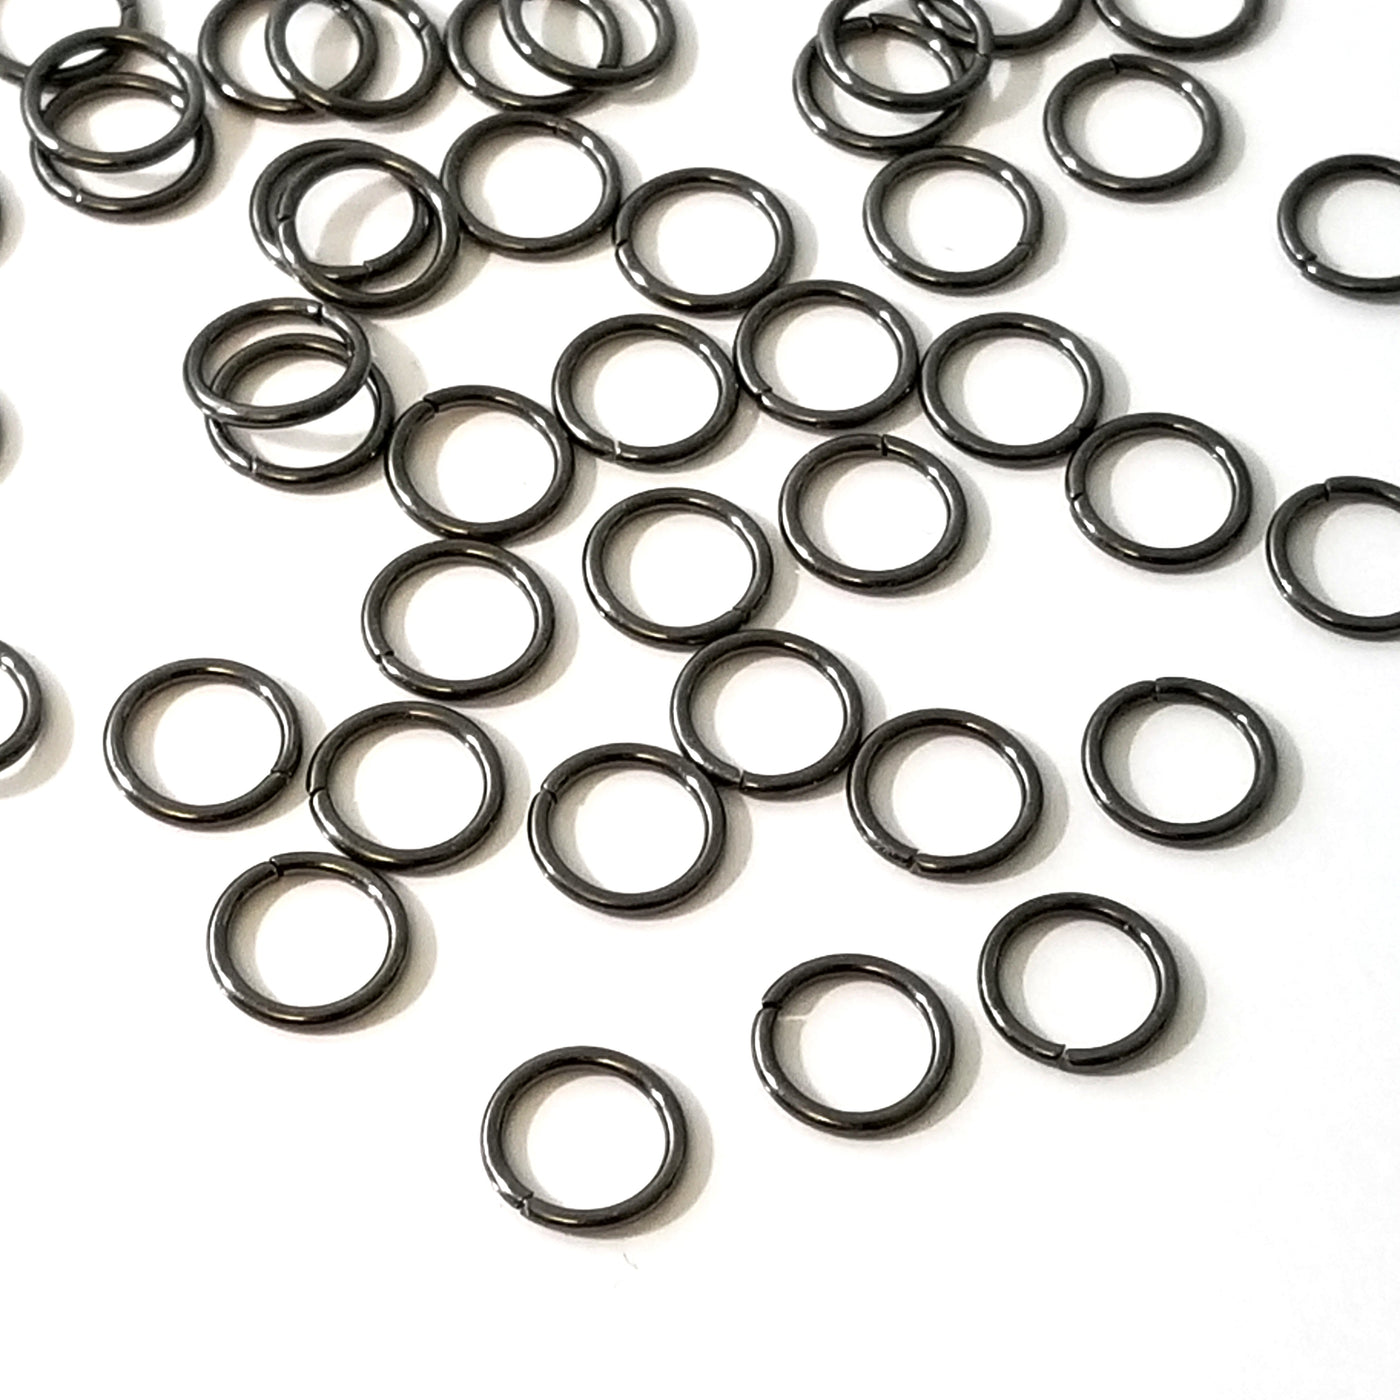 Cousin Jewelry Basics Metal Findings 400/Pkg-Black Jump Rings 4Mm To 6Mm